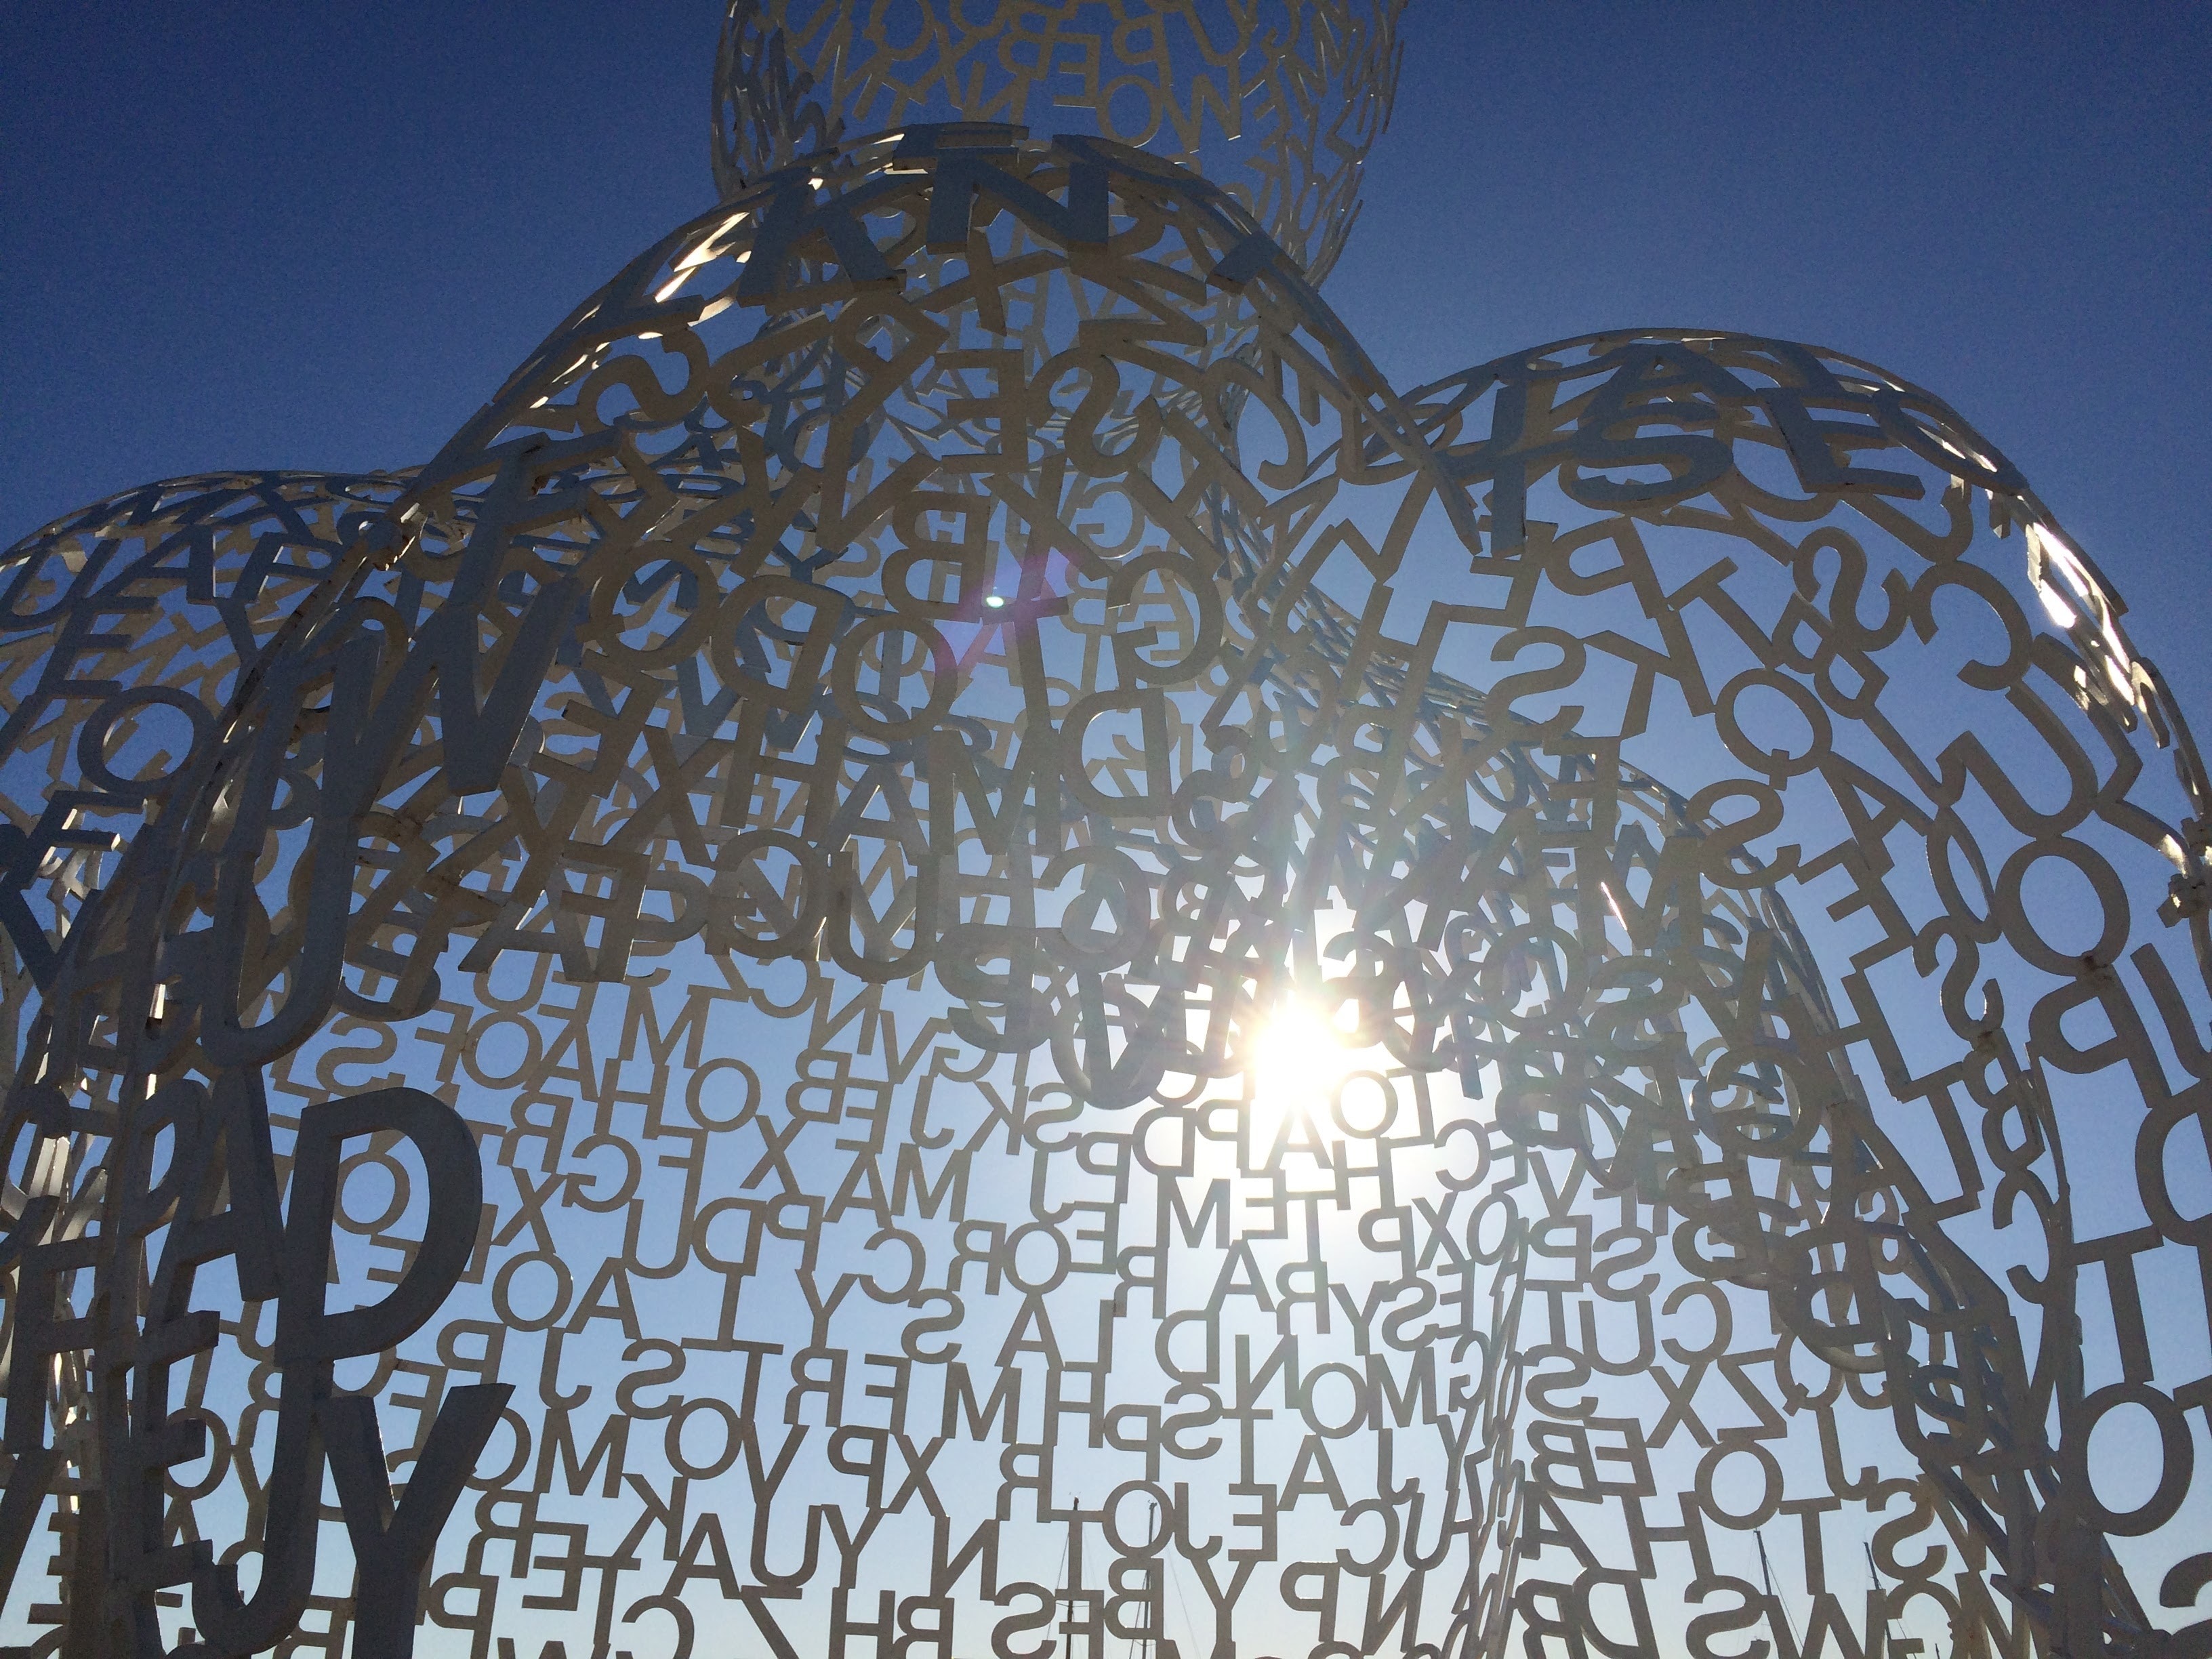 stainless steel Alphabet letters under the sun during daytime